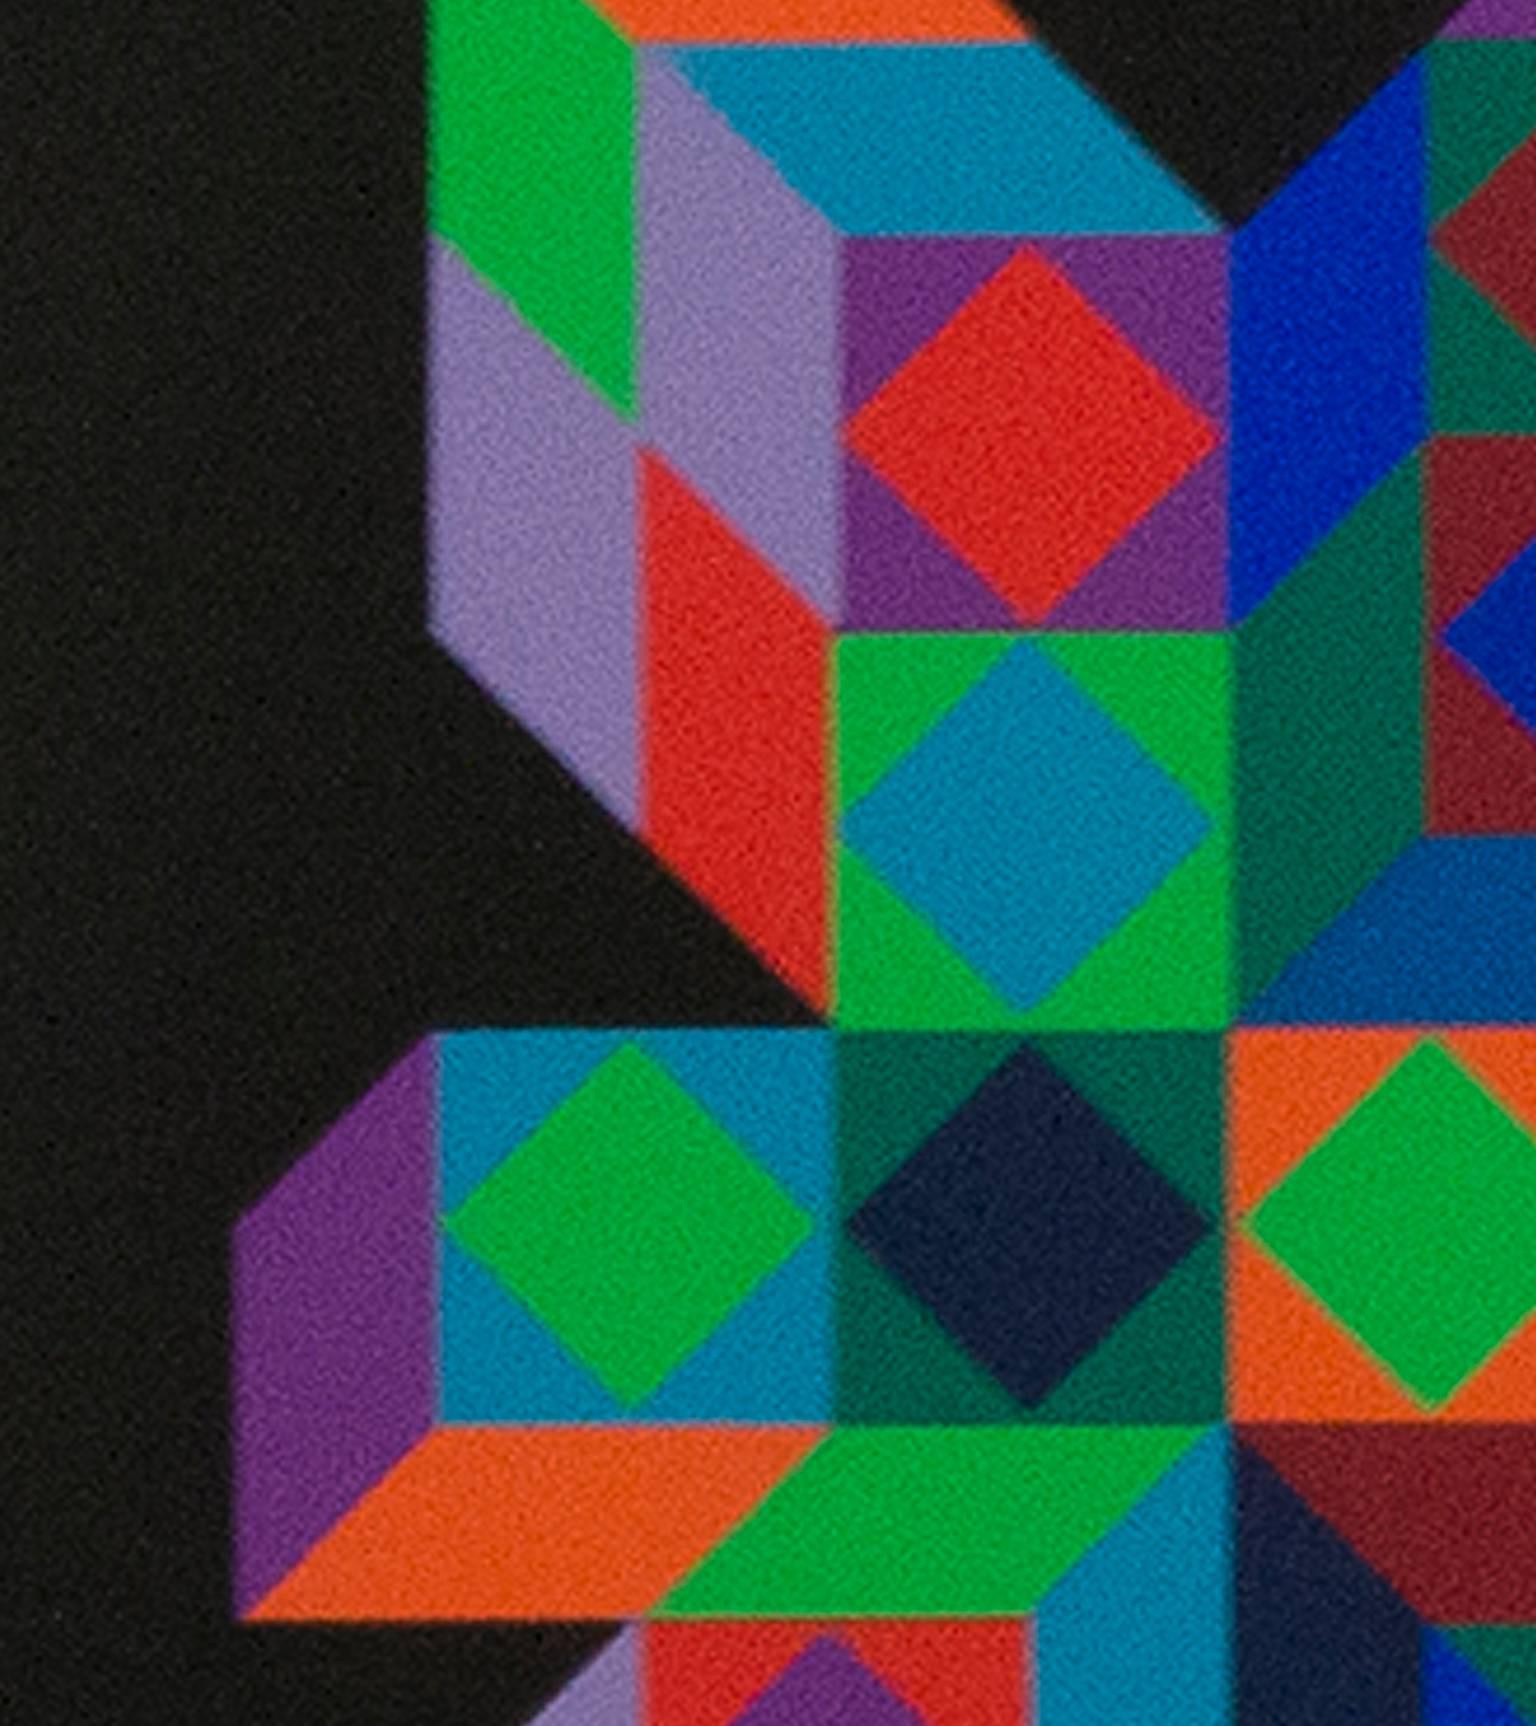 "F.V. 37/72" is an original serigraph on paper by Victor Vasarely. It is signed in the lower right. It is an abstract geometric composition in green, red, blue, orange, and purple on black. 

8 1/2" x 5 1/2" art
16 1/8" x 14